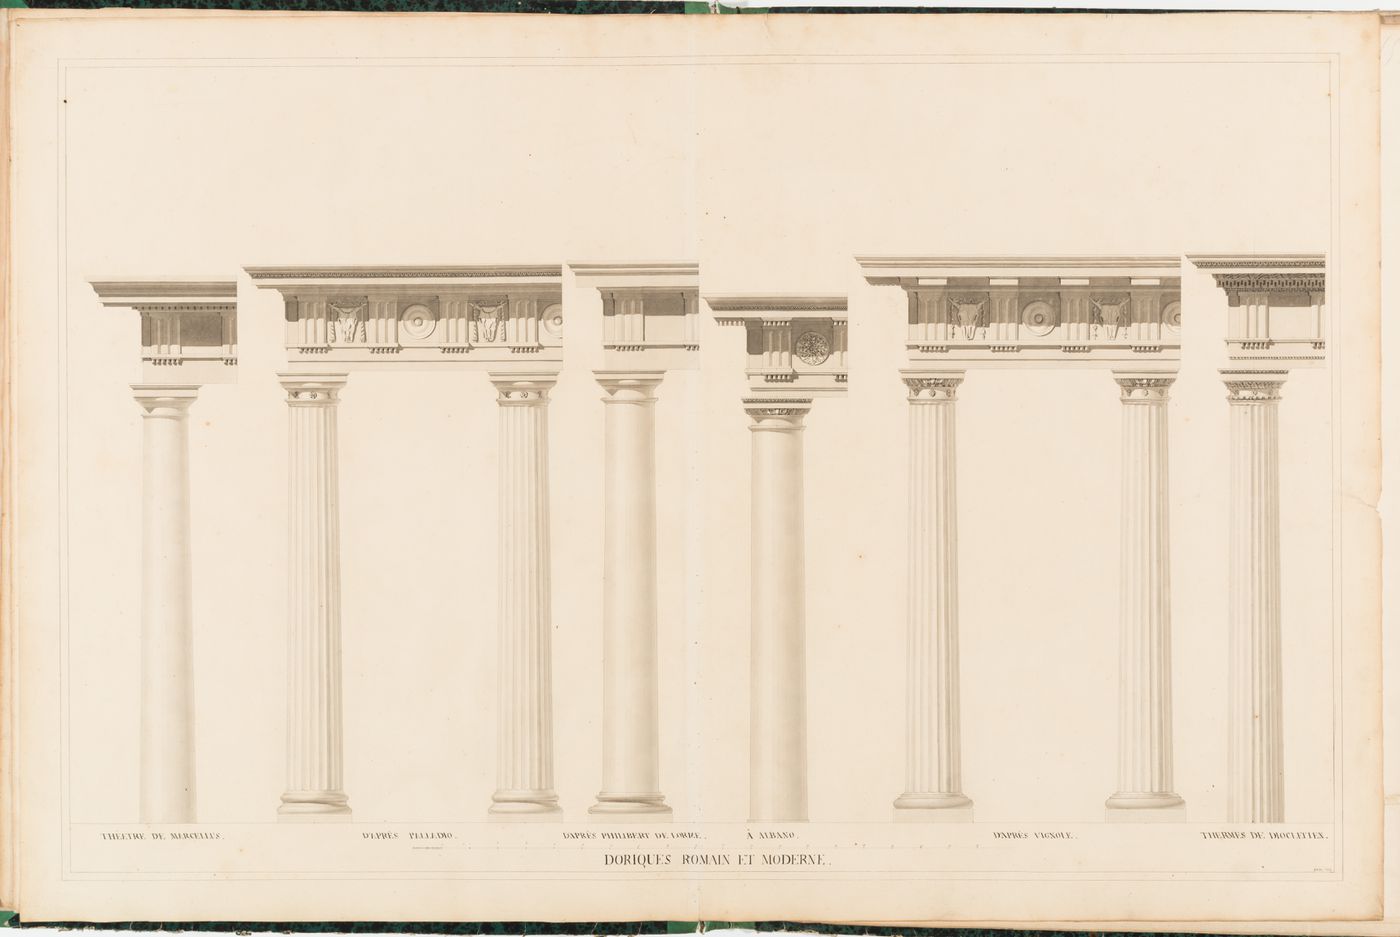 Elevations of columns and entablatures from six Doric buildings: the Theatre of Marcellus and the Terme di Diocleziano, Rome, a building at Albano, and examples after Palladio, Delorme, and Vignola